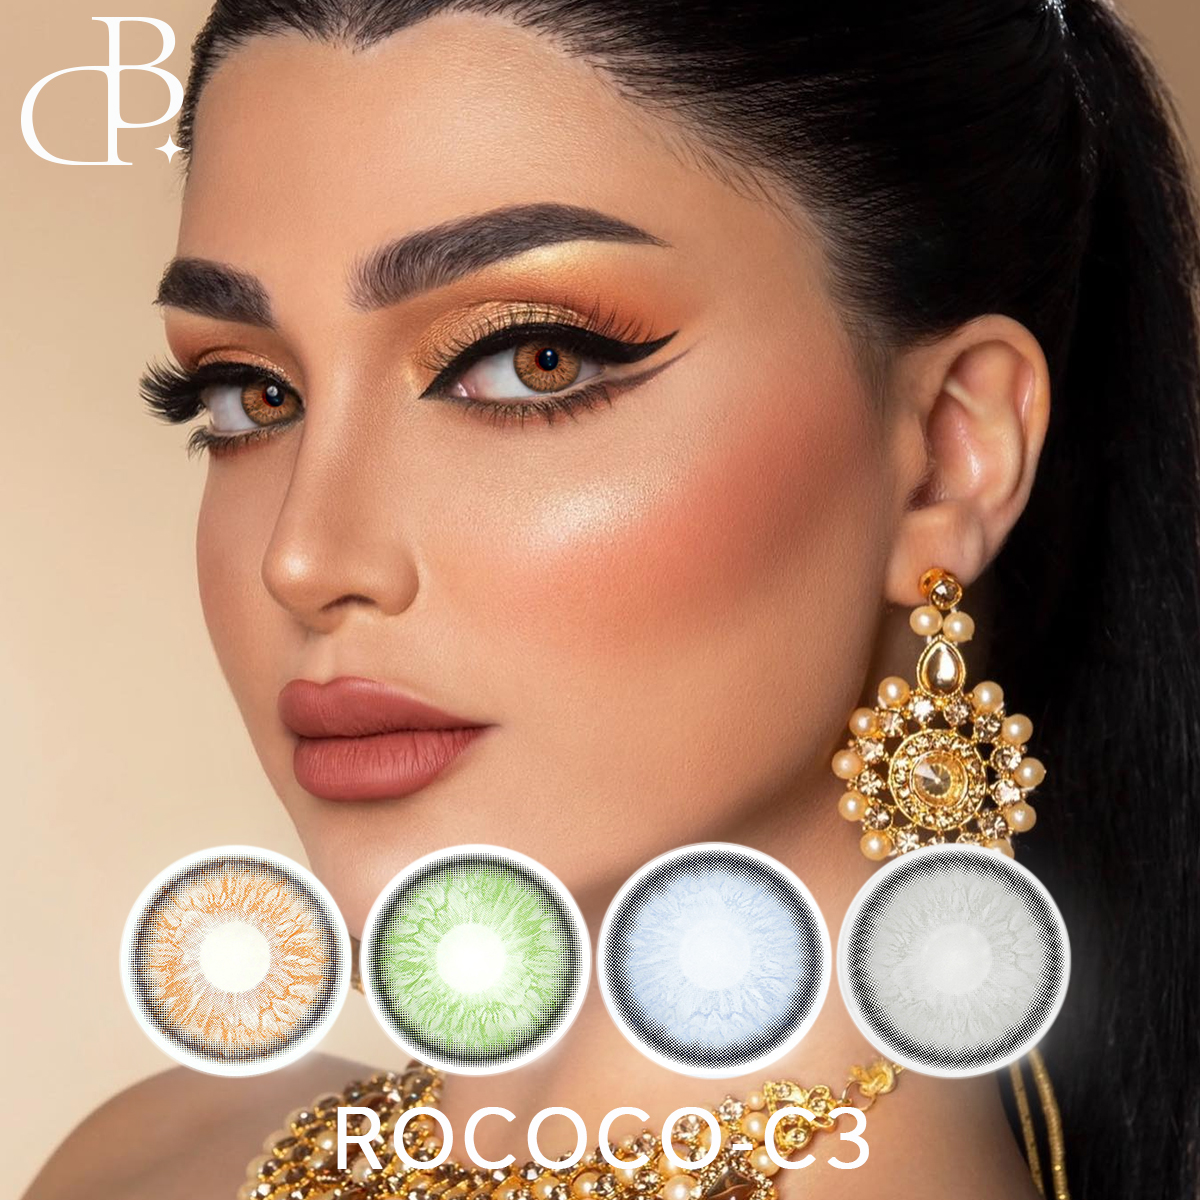 https://www.dblenses.com/rococo-3-new-looking-cosmetic-wholesale-color-contact-lens-cheap-soft-yearly-eye-colored-contact-lenses-product/